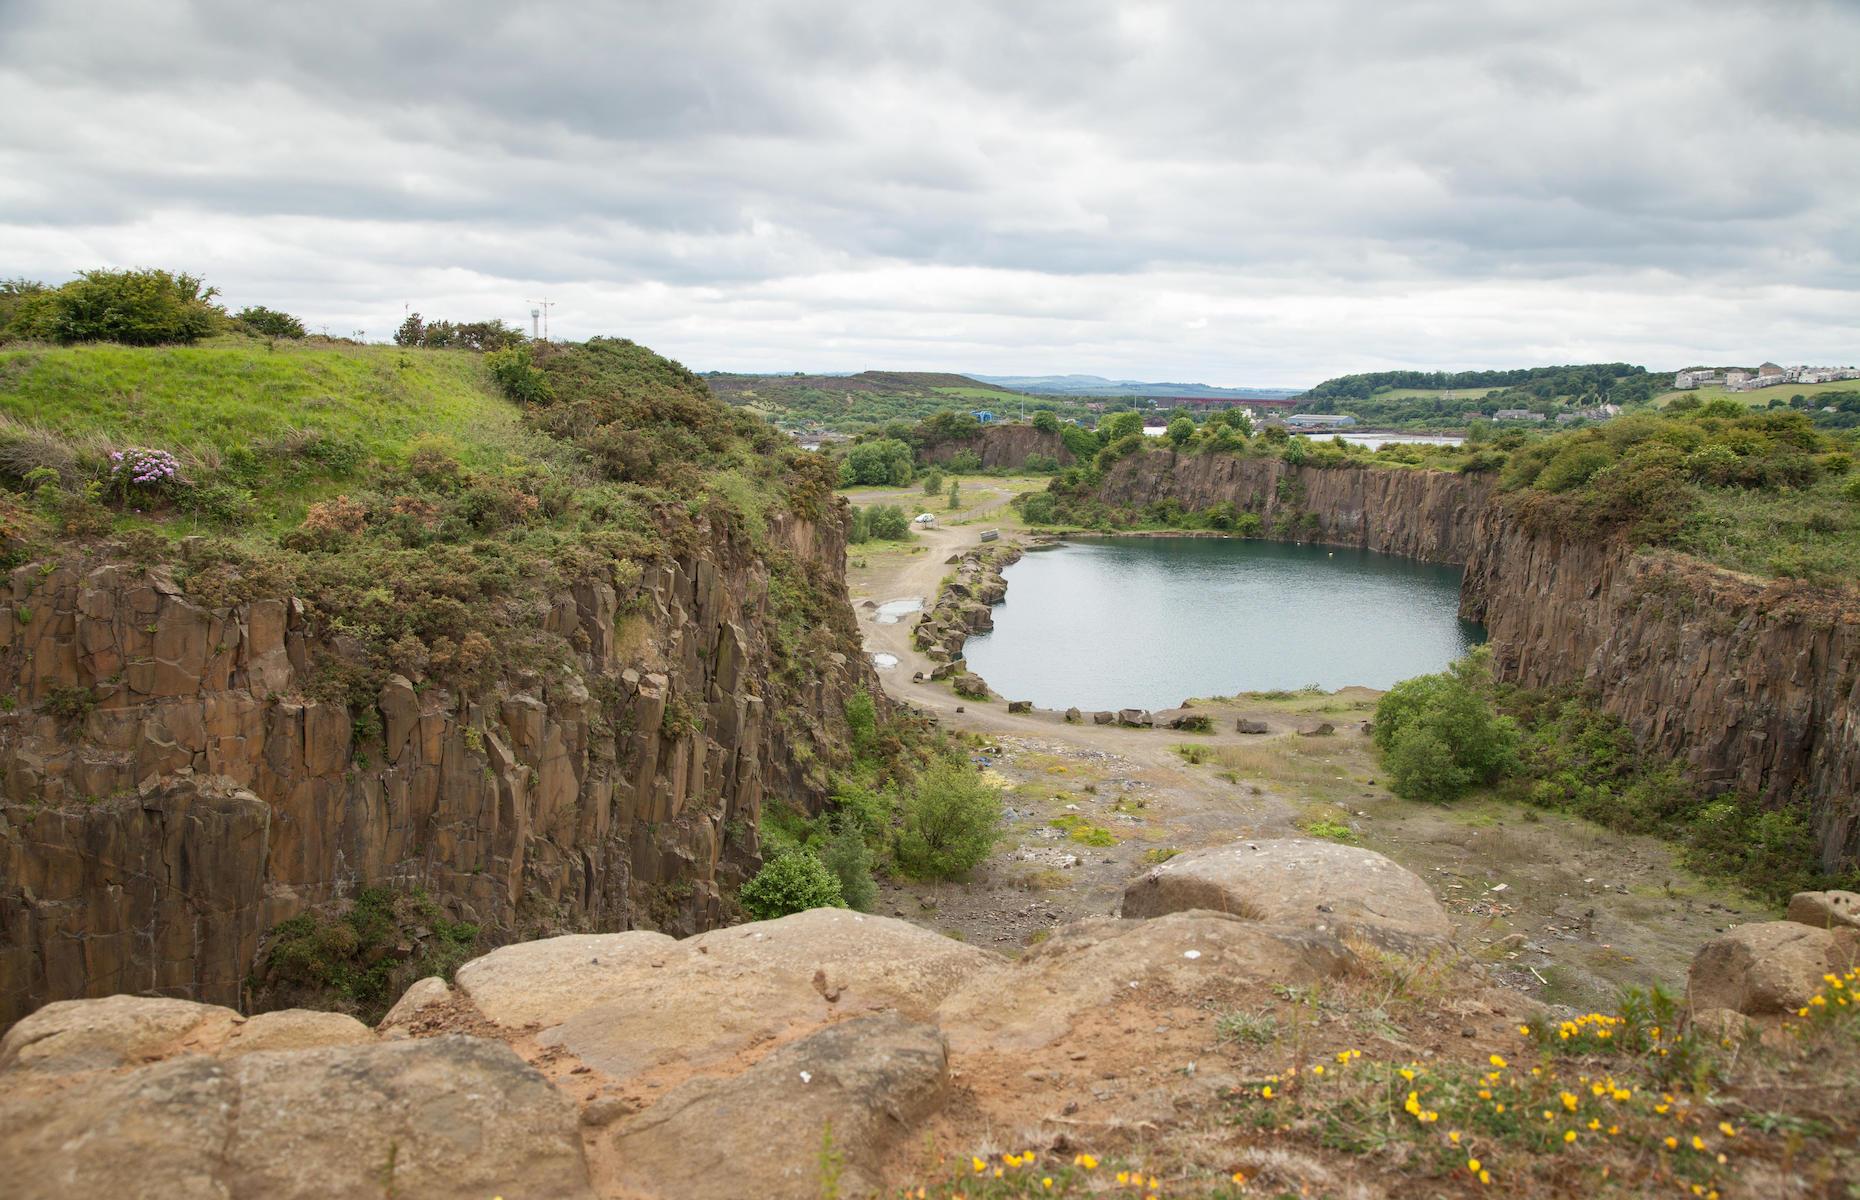 <p>On a hot and muggy day there are few things more tempting than leaping into a cool body of water. But the urge to jump into the freezing waters of Prestonhill Quarry in Inverkeithing, Fife, has led to several tragedies. Nicknamed 'death trap quarry' by the media, the former dolerite quarry has claimed four lives in the last 50 years – three of them in the last 10. A 12-year-old boy fell to his death there in 1973, while two 18-year-old boys drowned there in 2014 and 2015 respectively. In 2017, a 36-year-old teacher became the quarry's fourth victim after failing to resurface following a night-time scuba dive.</p>